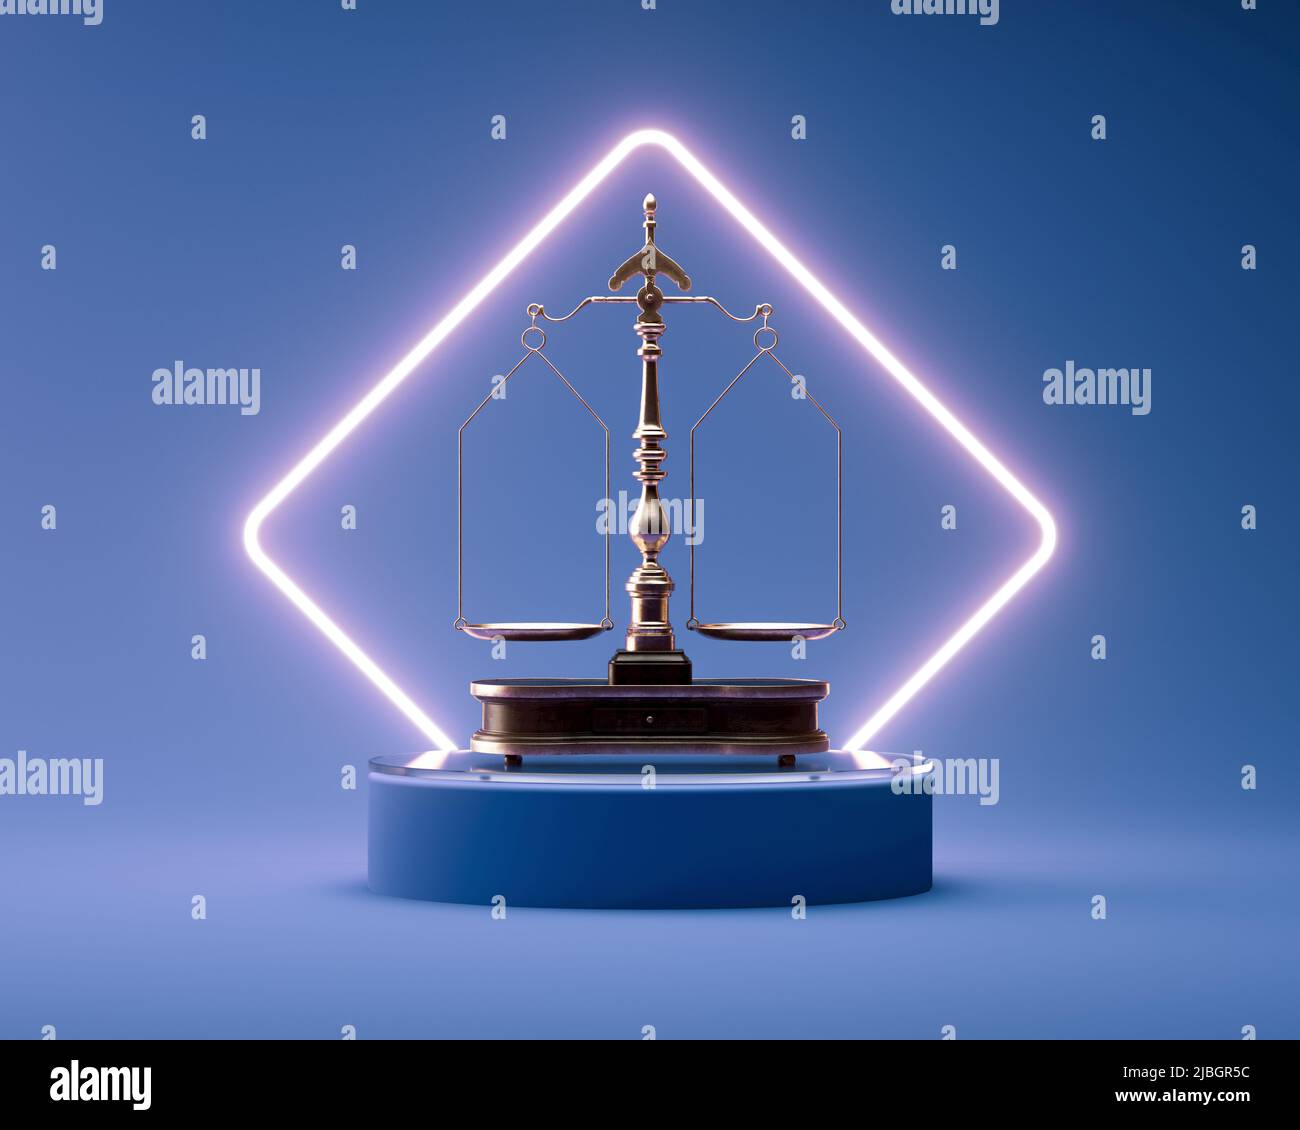 Ornate brass justice scales with a wooden base on a round blue stage lit by a square neon back light  - 3D render Stock Photo